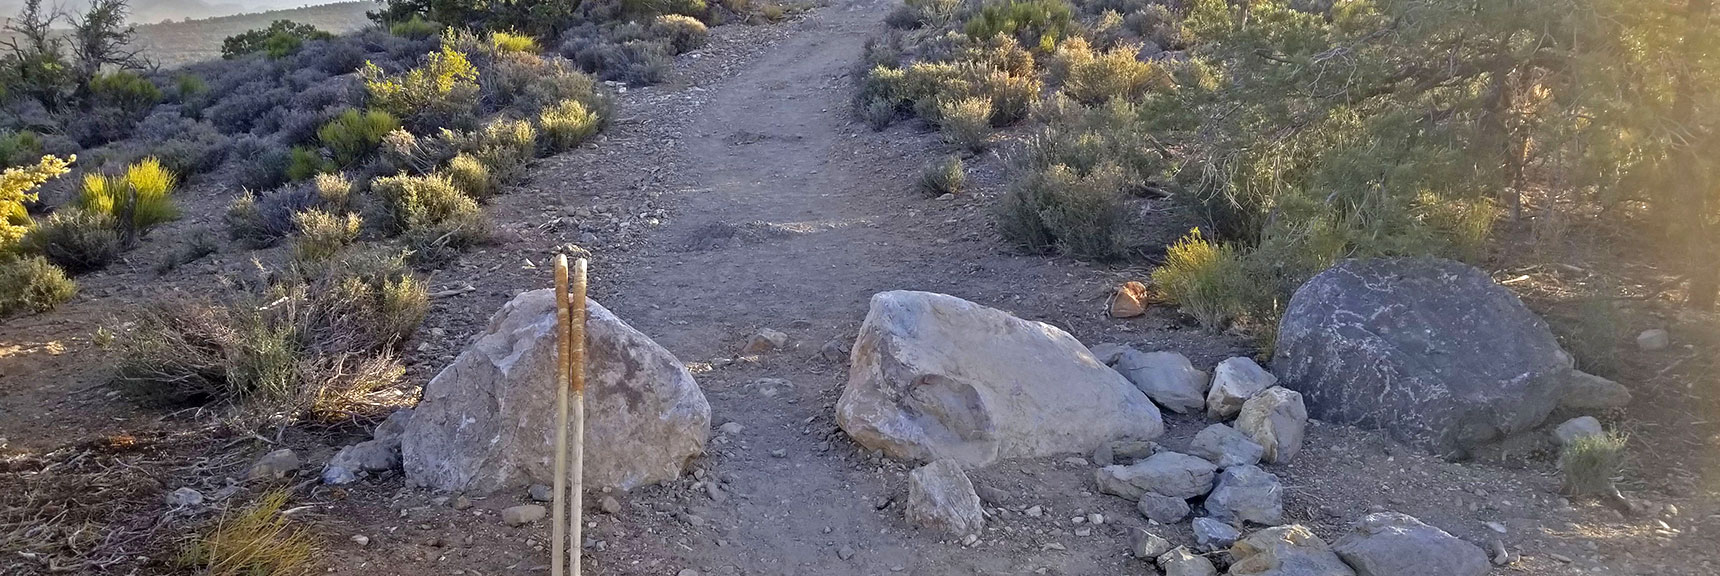 Road Behind Communications Tower Reserved for Foot Traffic Only | Rainbow Mountains Upper Crest Ridge, Nevada